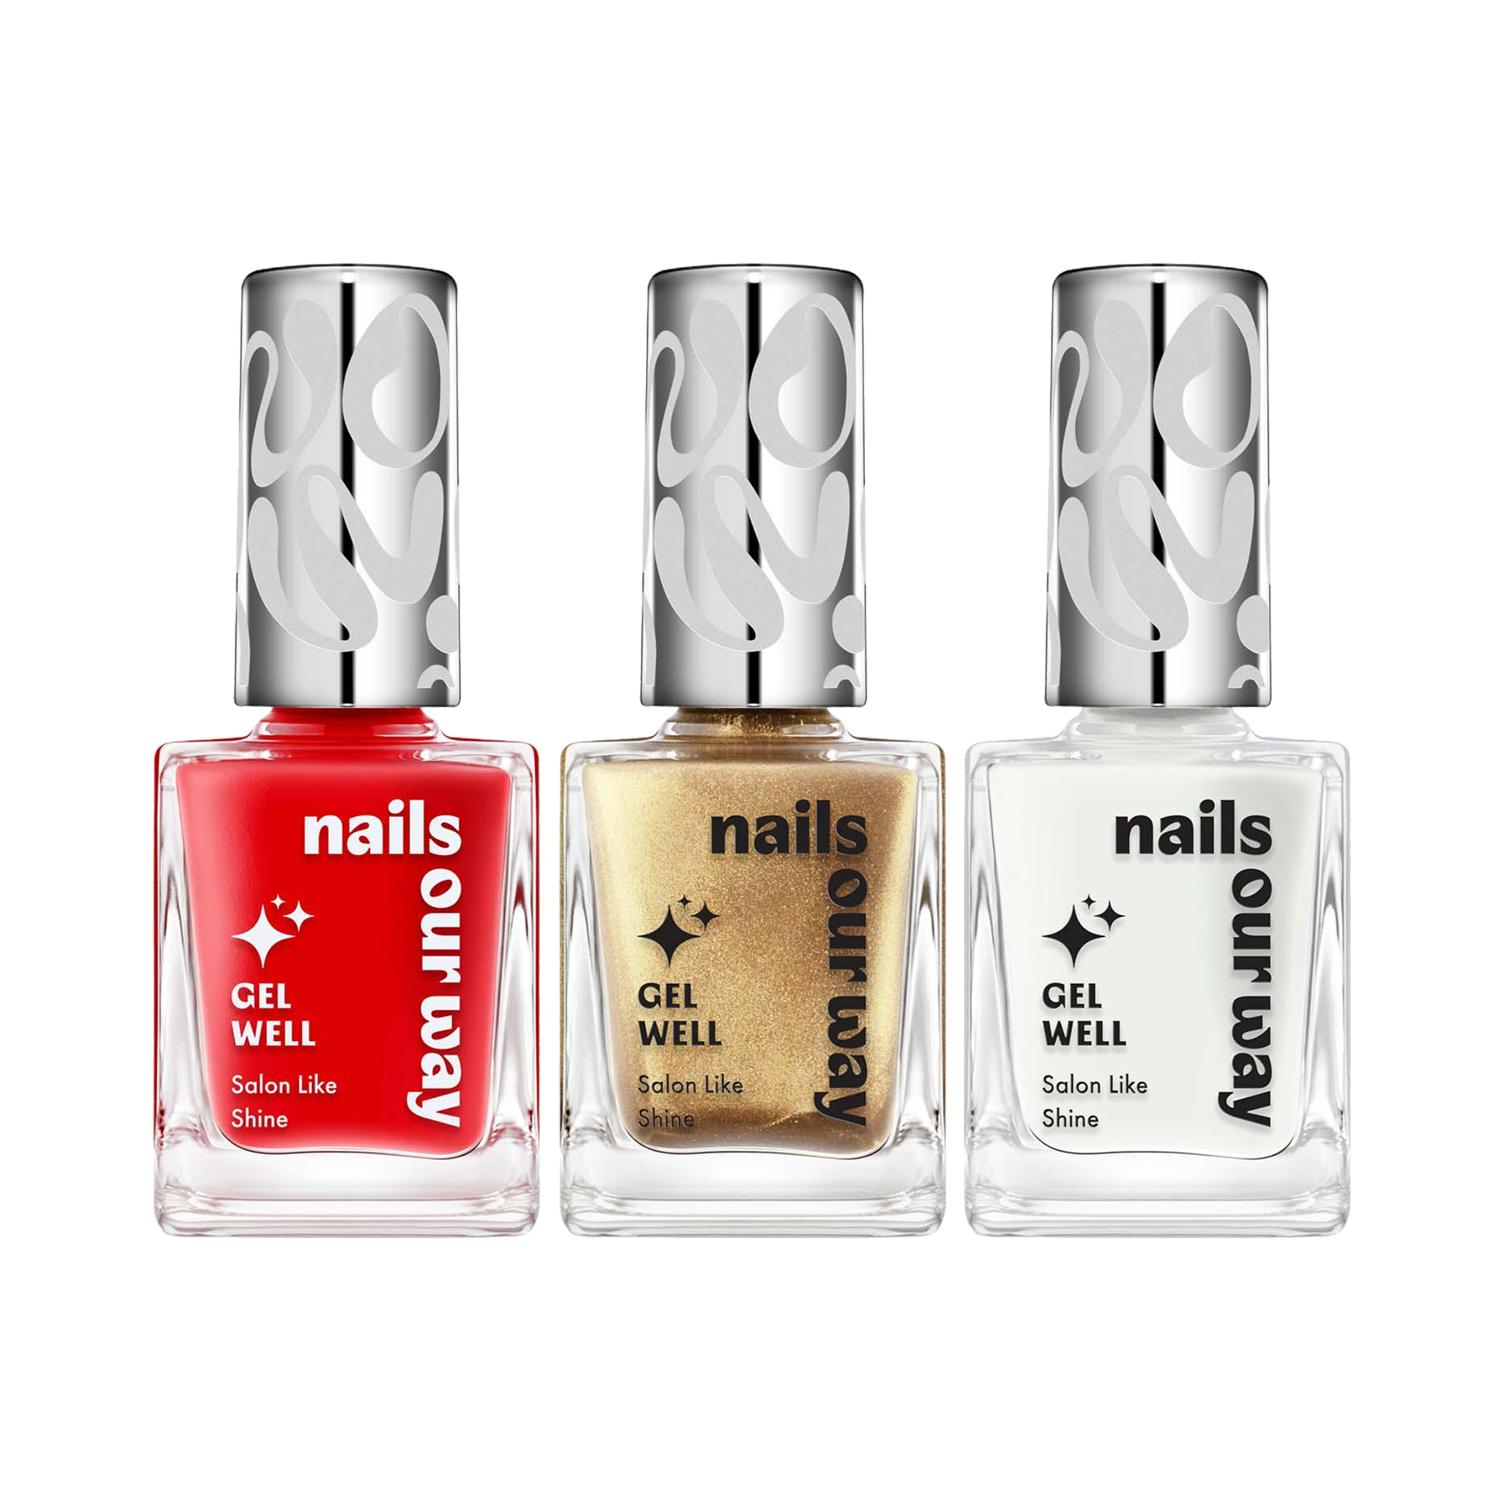 Nails Our Way | Nails Our Way Gel Well Nail Enamel Quirky Weekend Combo - Pk3